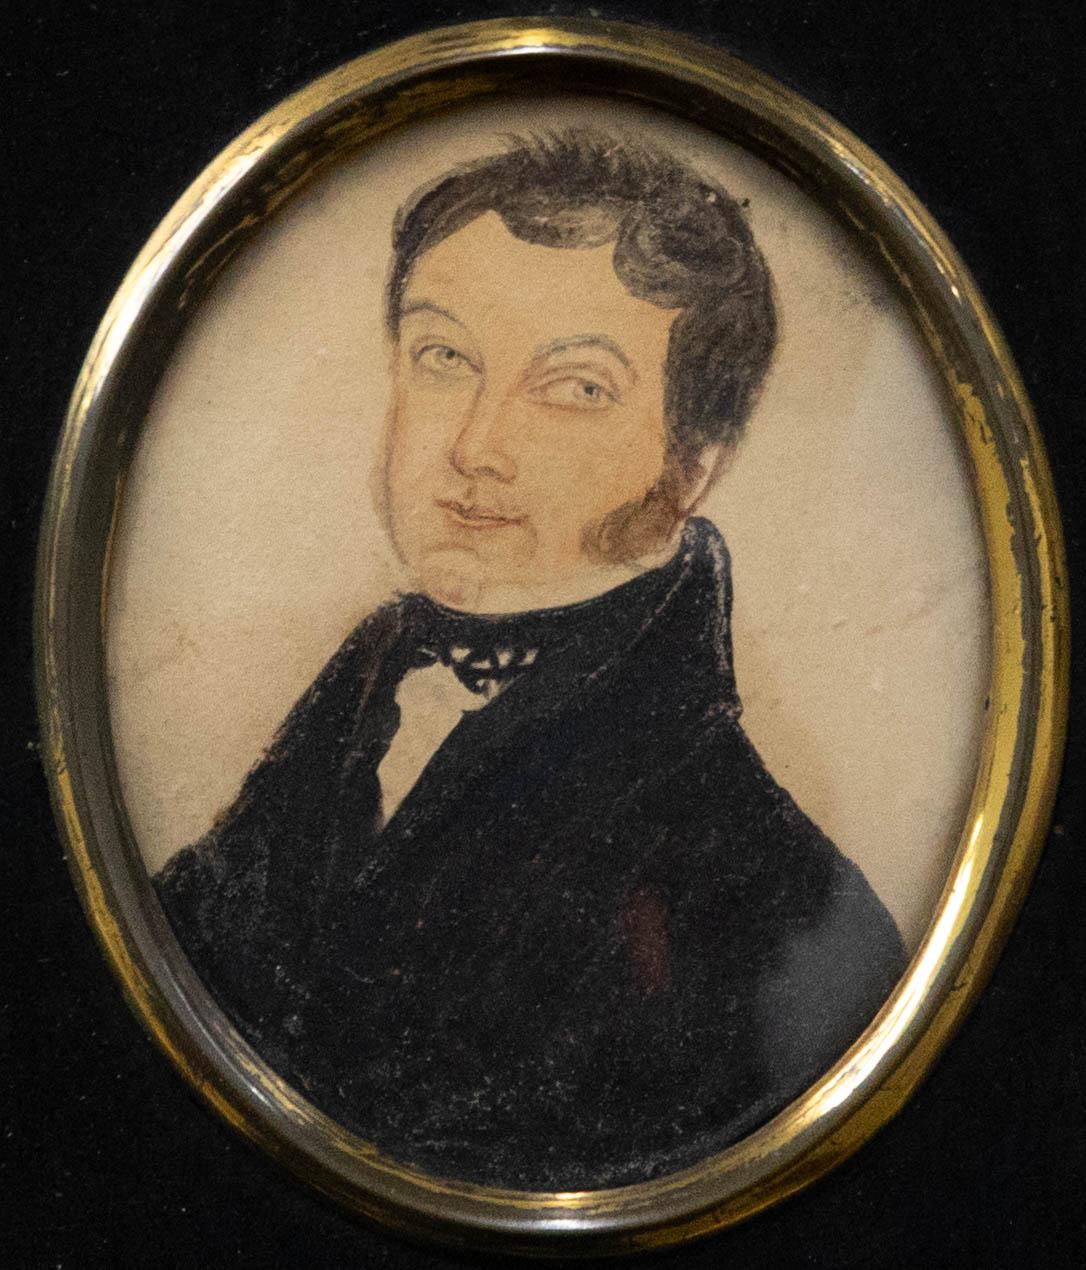 A charming early 19th Century miniature portrait of a kindly looking gentleman in a smart black jacket and wing collar shirt. The portrait is unsigned and presented in a traditional papier mache frame with brass oval inner window and foliate brass